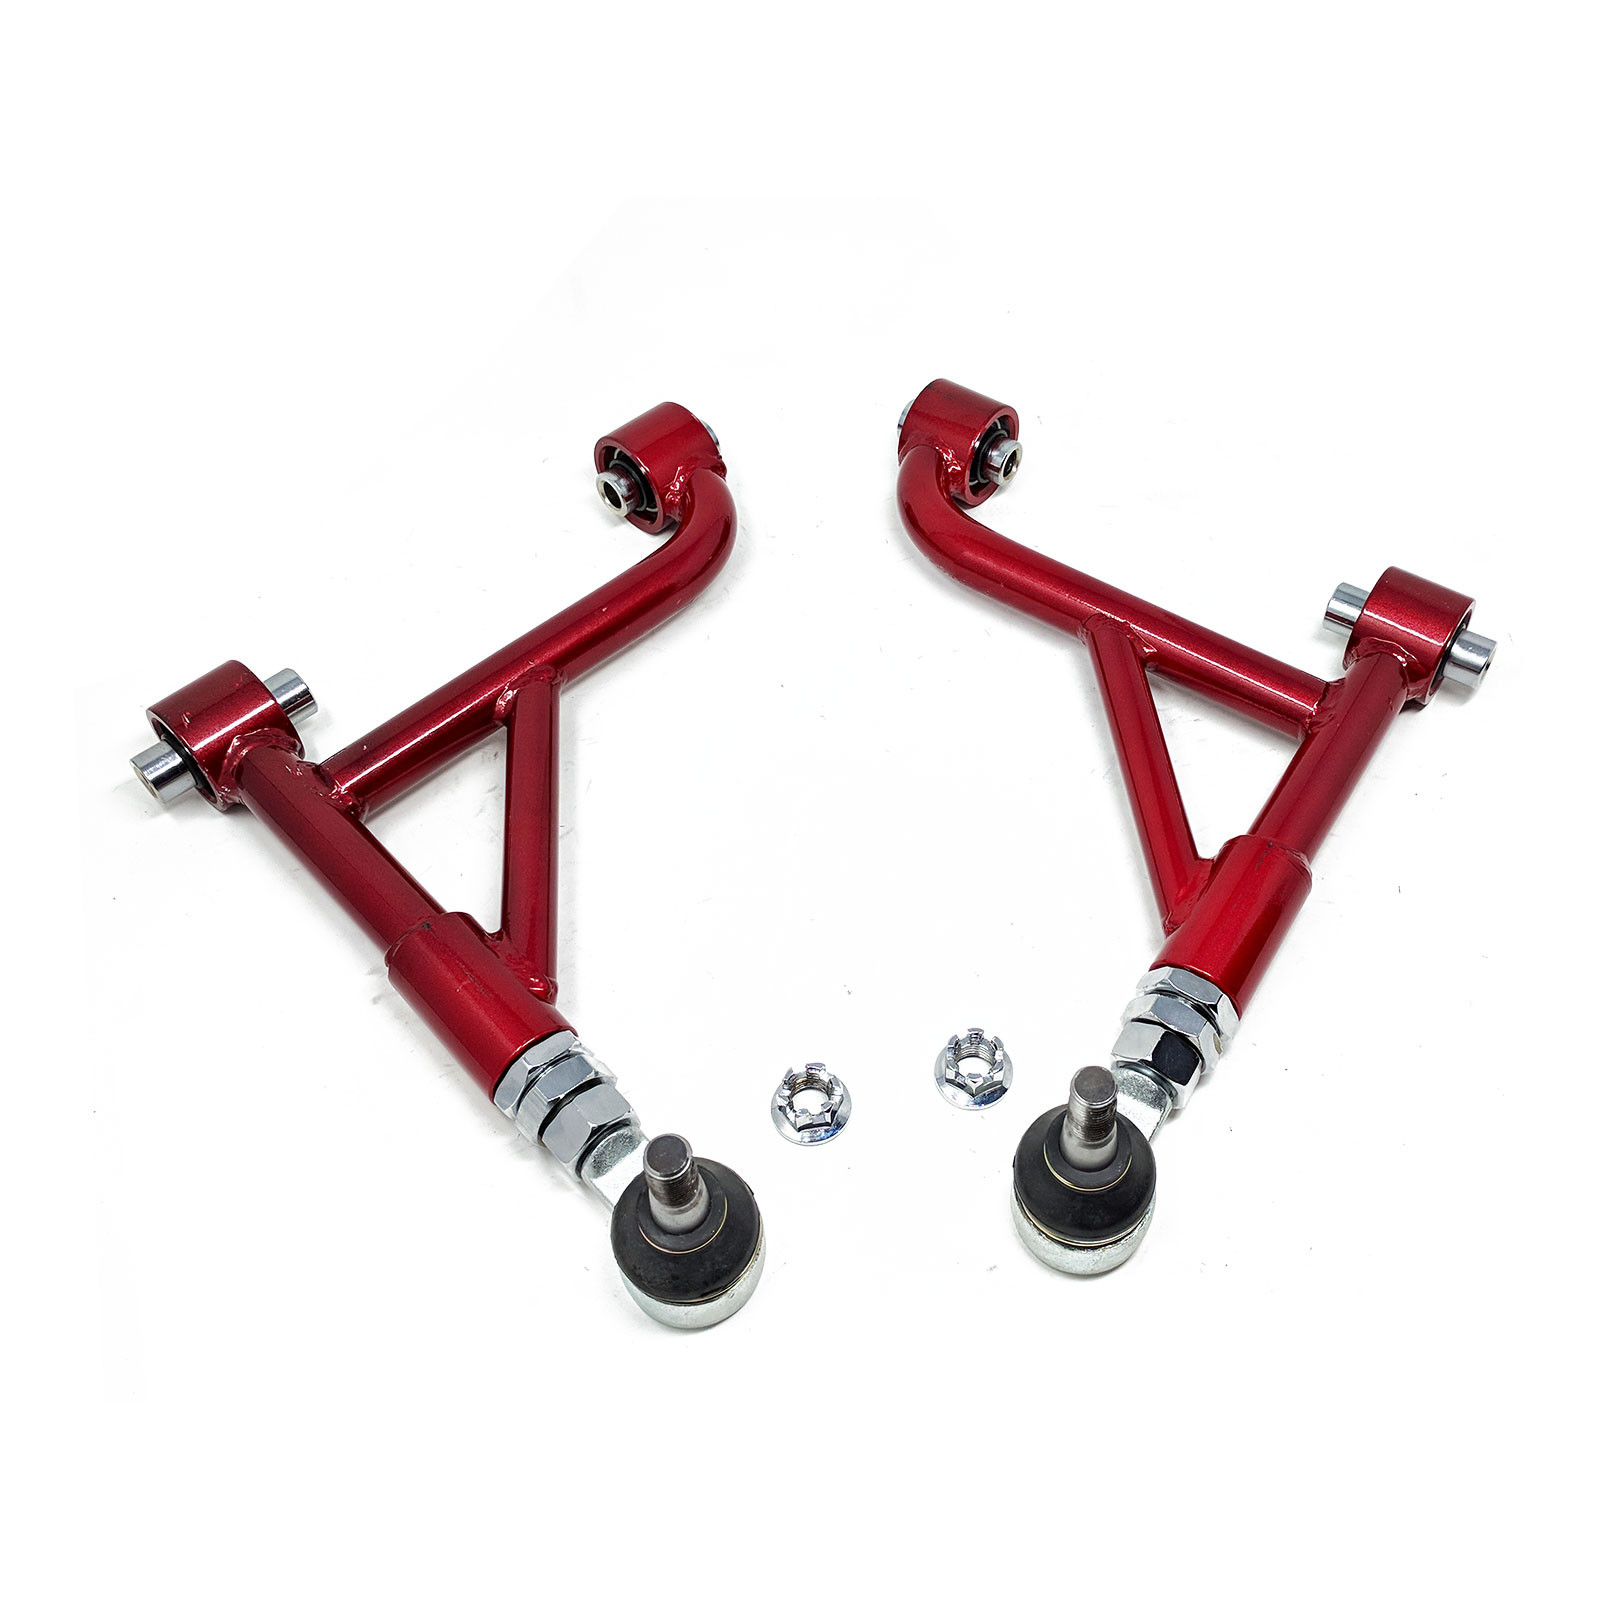 2002-10 Godspeed AK-184-C Adjustable Rear Camber Arms With Spherical Bearings compatible with Lexus SC430 Z40 Set of 2 